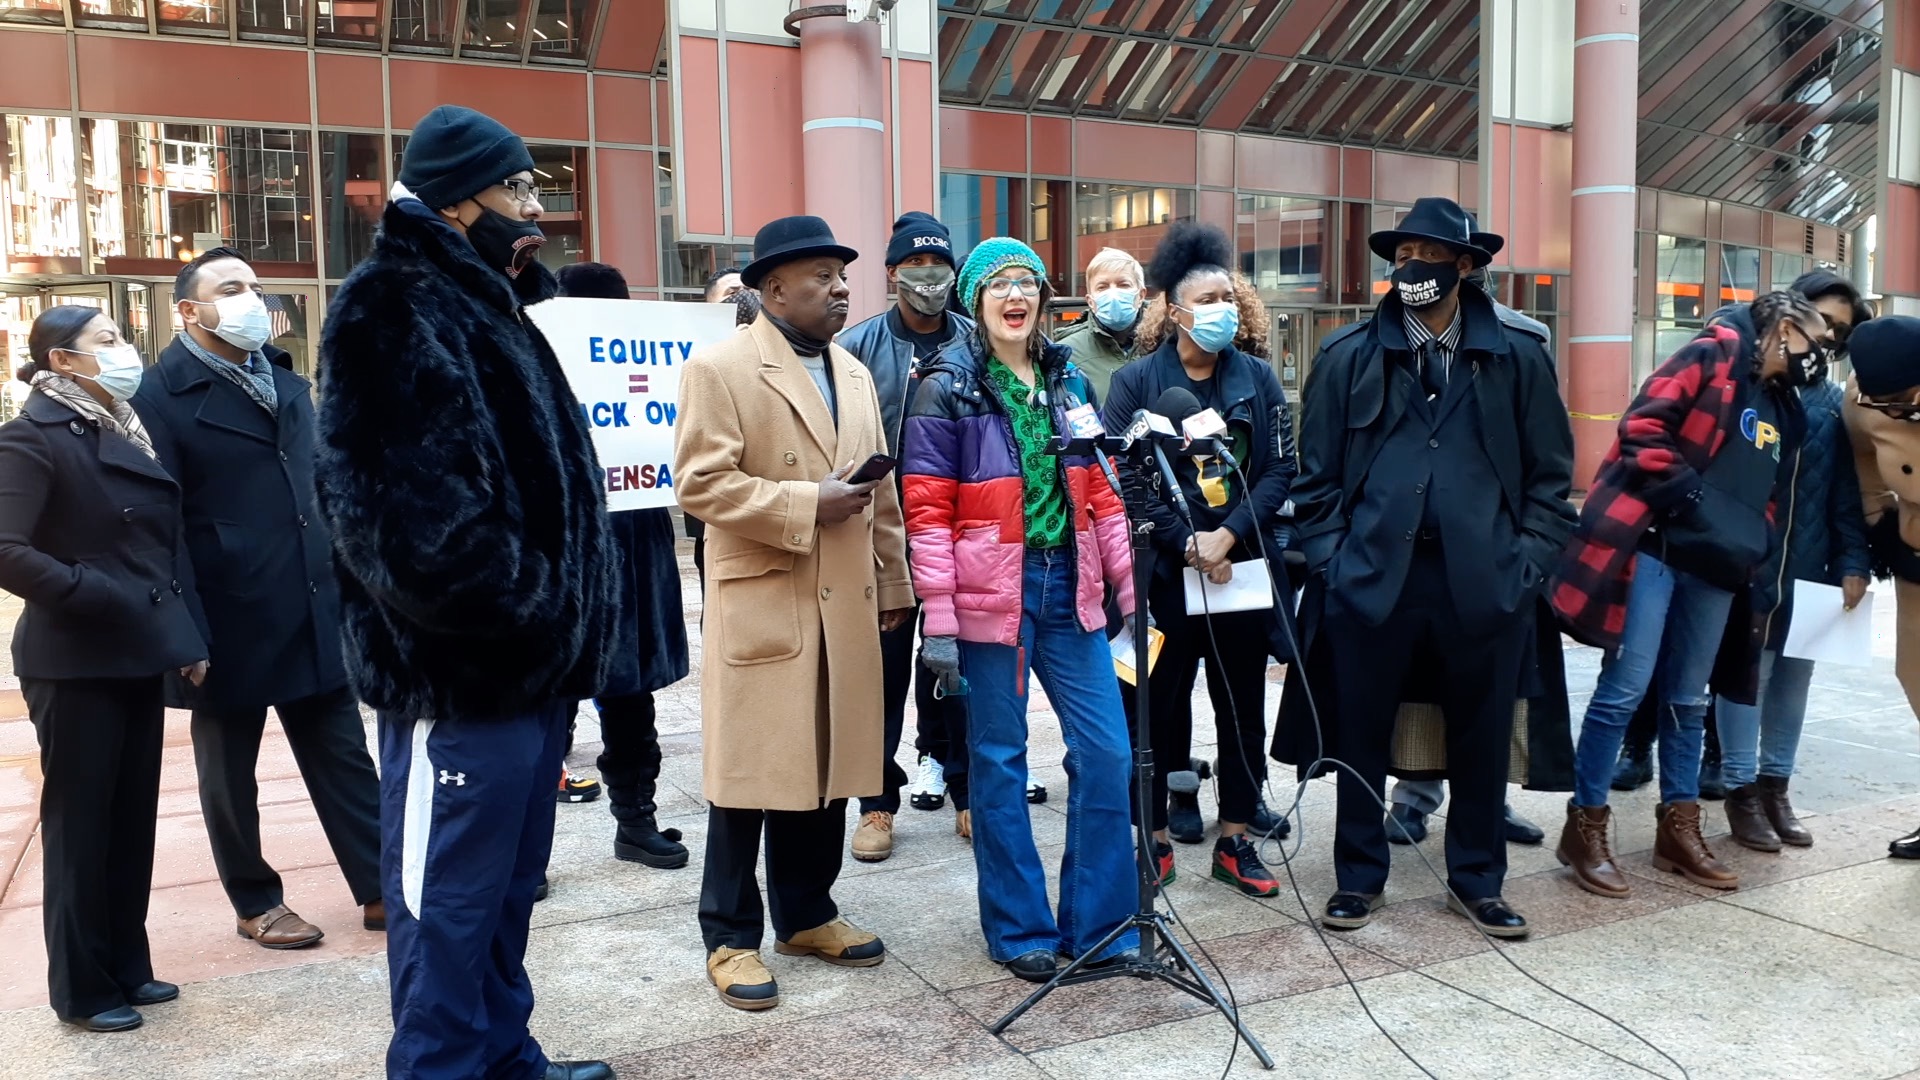 Chicago Social Equity Rights Press Conference Anna Rose II-Epstein 02-23-2021